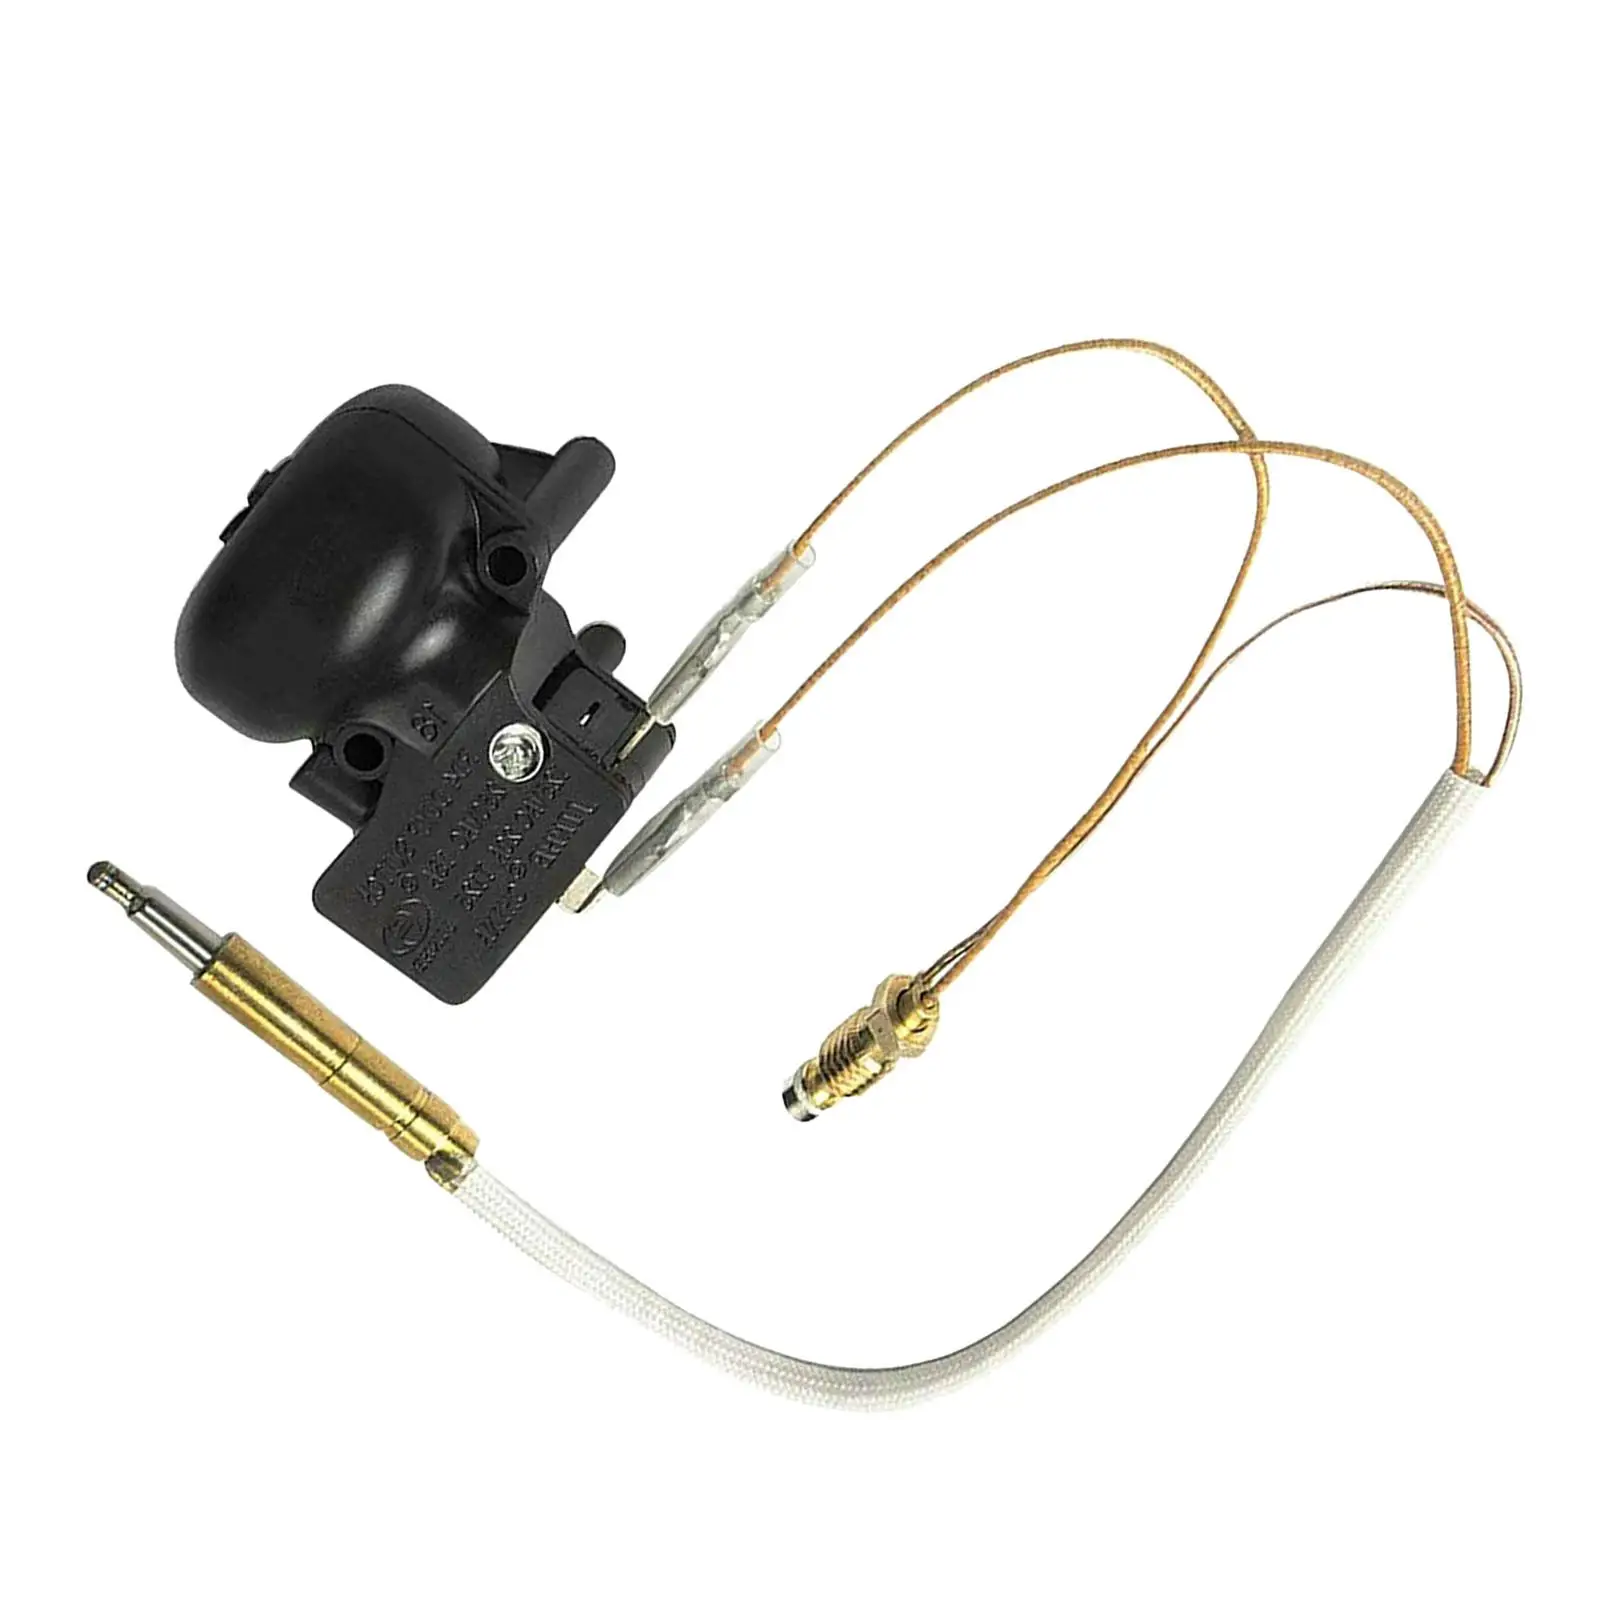 Replacement Thermocouple tilt switch of tirm for  Gas Patio Heater Garden